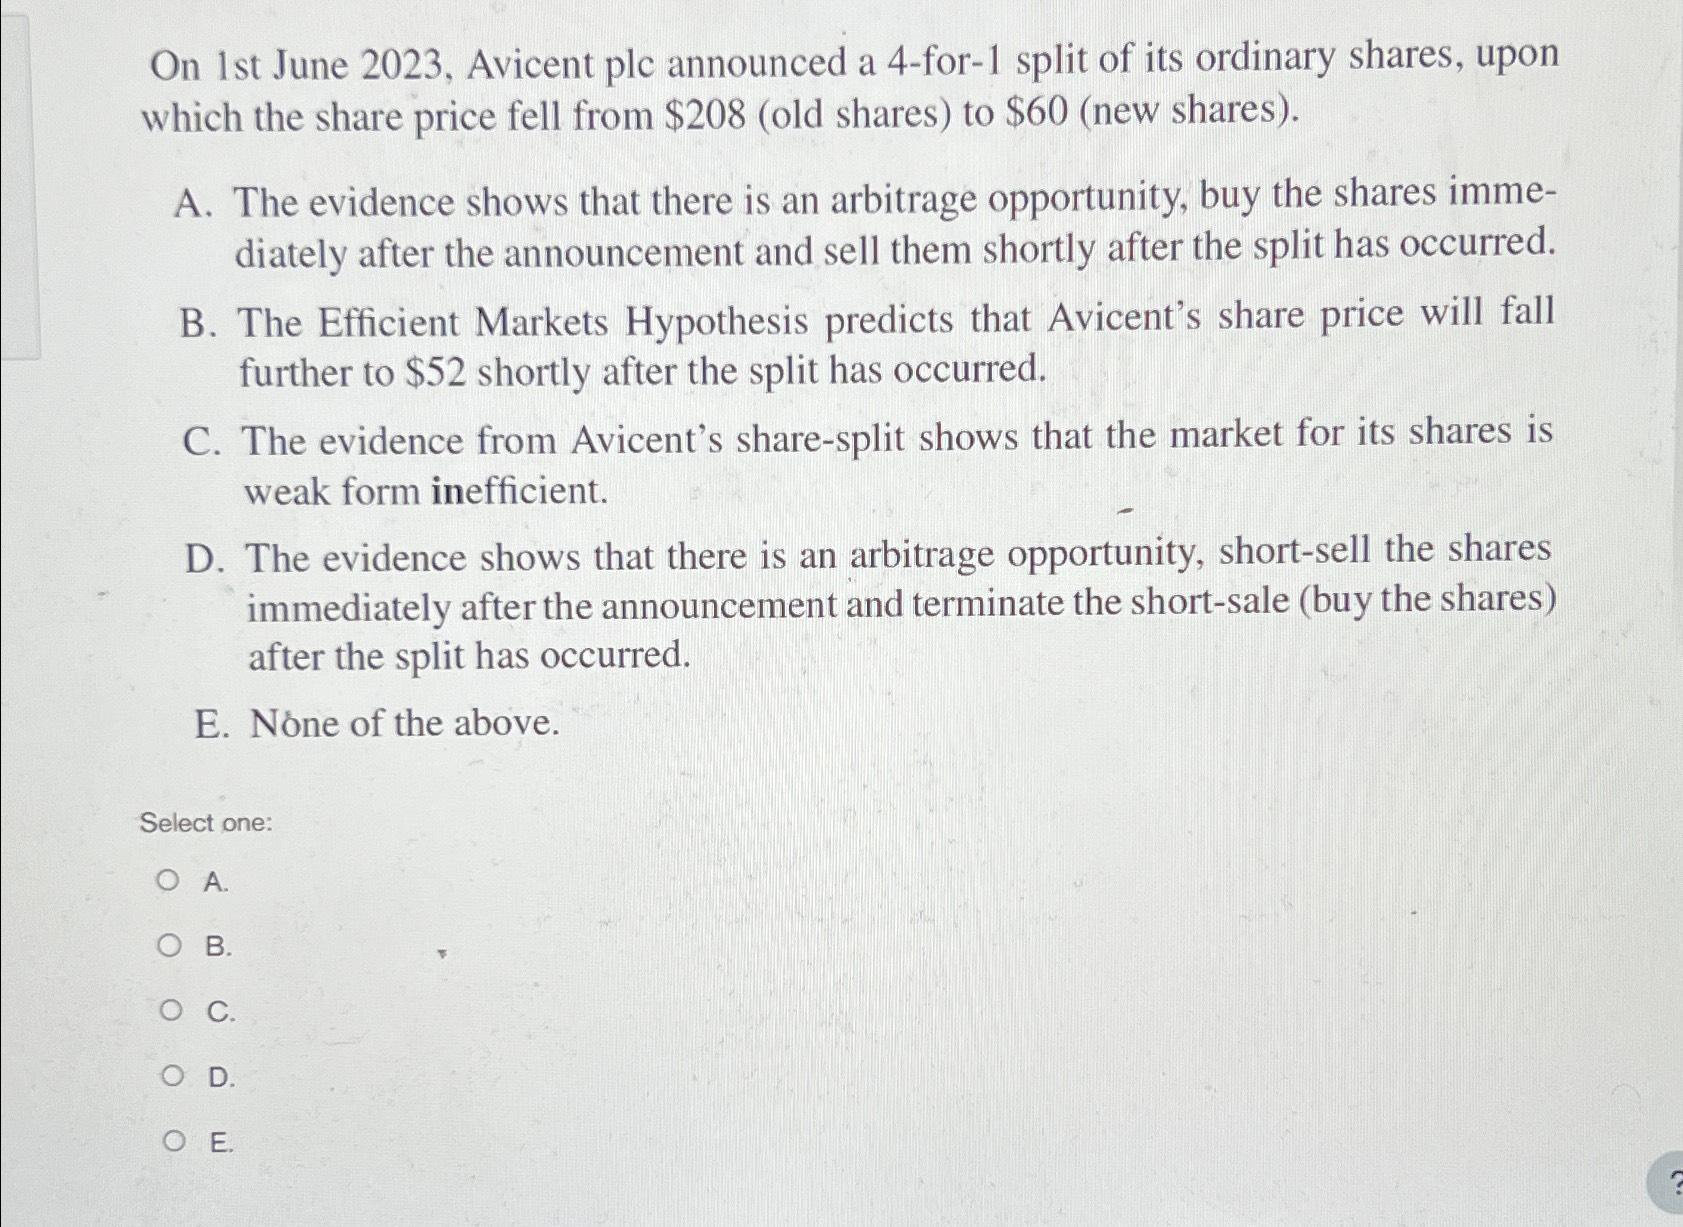 On 1st June 2023, Avicent plc announced a 4-for-1 split of its ordinary shares, upon which the share price